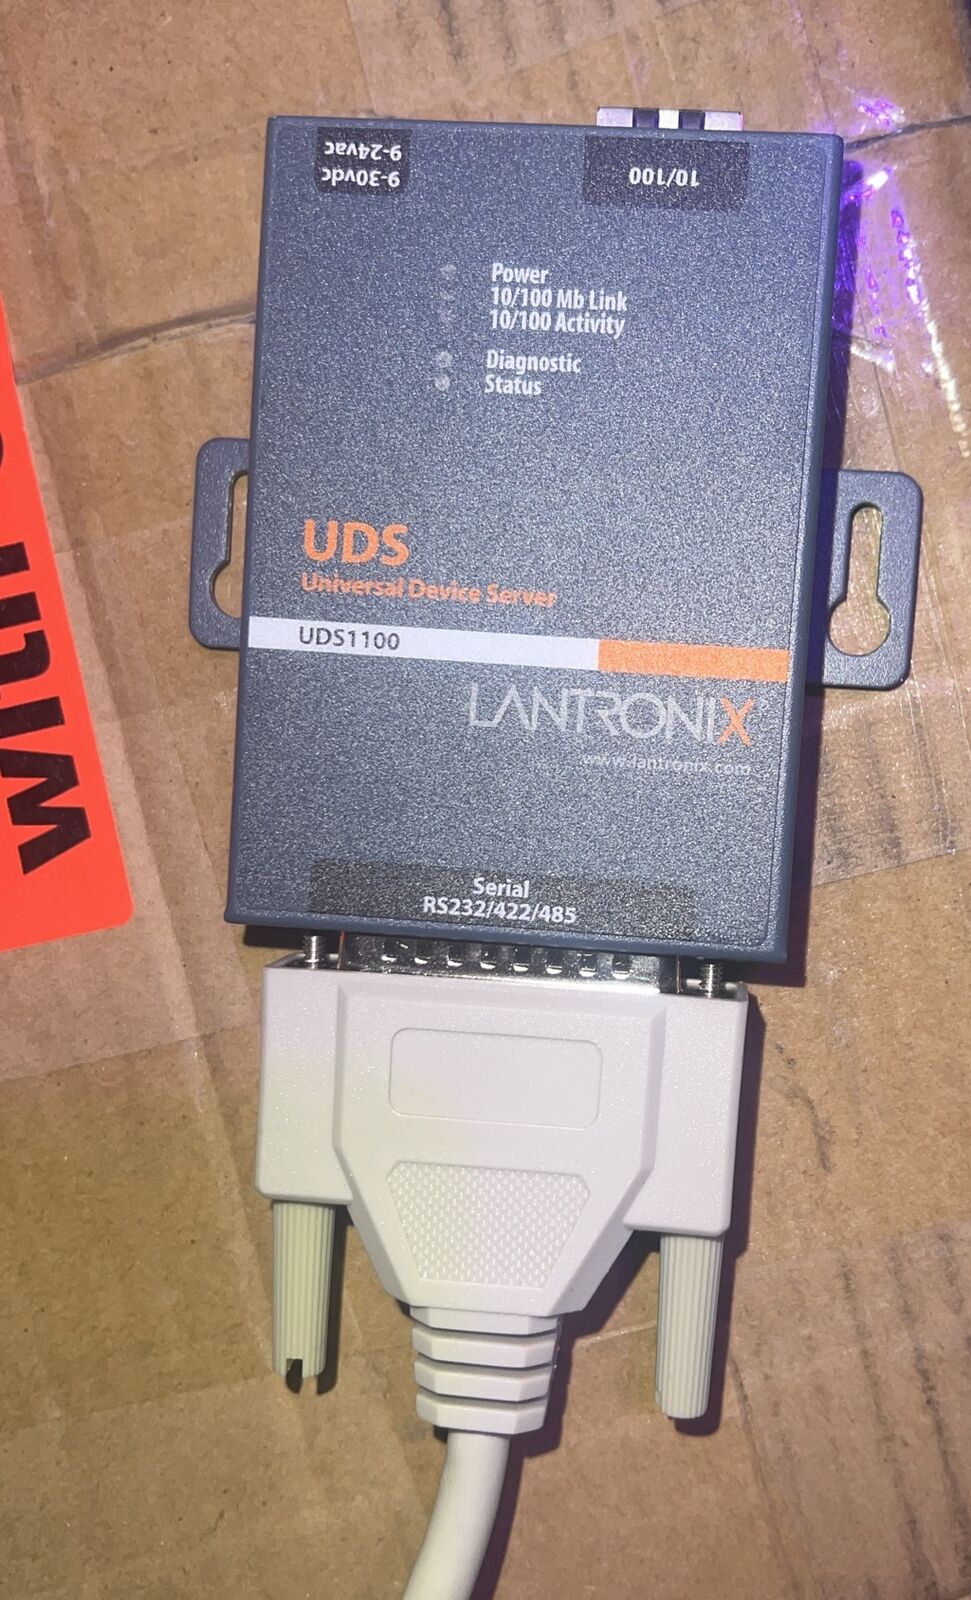 Lantronix UDS1100 UD11000P0-01 One Port Serial RS232/ RS422/ RS485 to IP